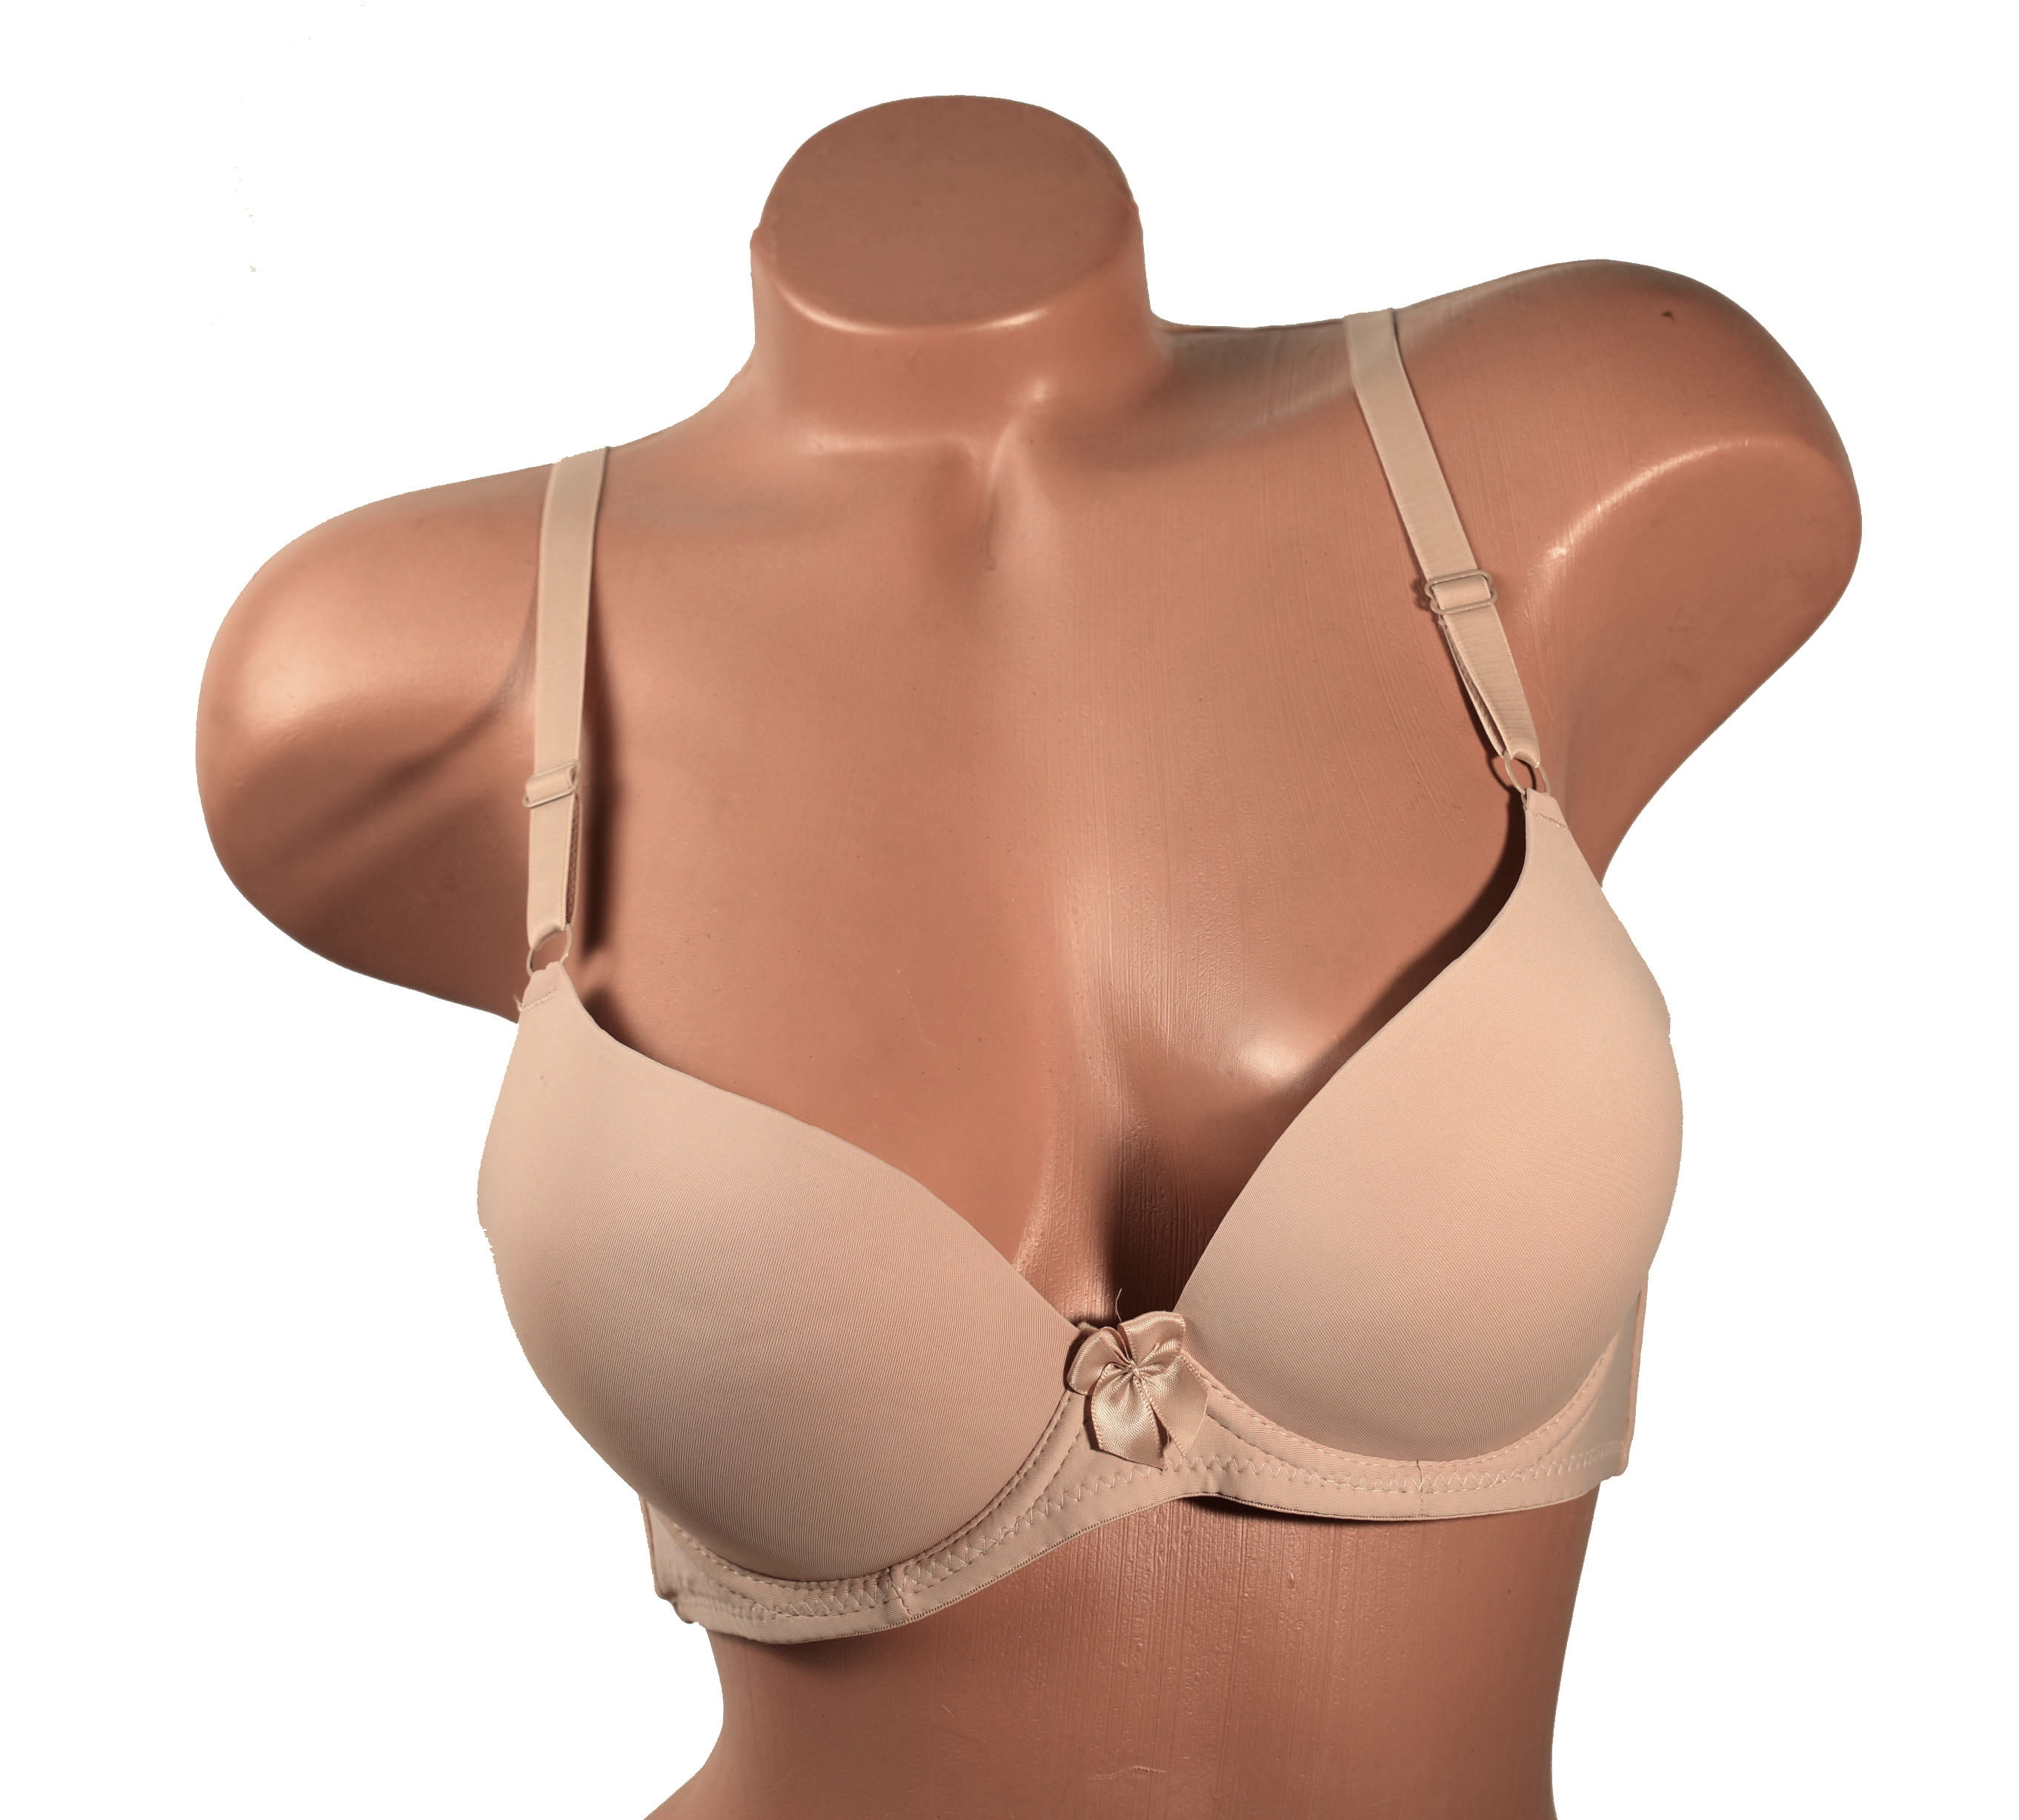 Women Bras 6 Pack of Double Pushup Basic Color Plain Bra B cup C cup Size  32B (9902)